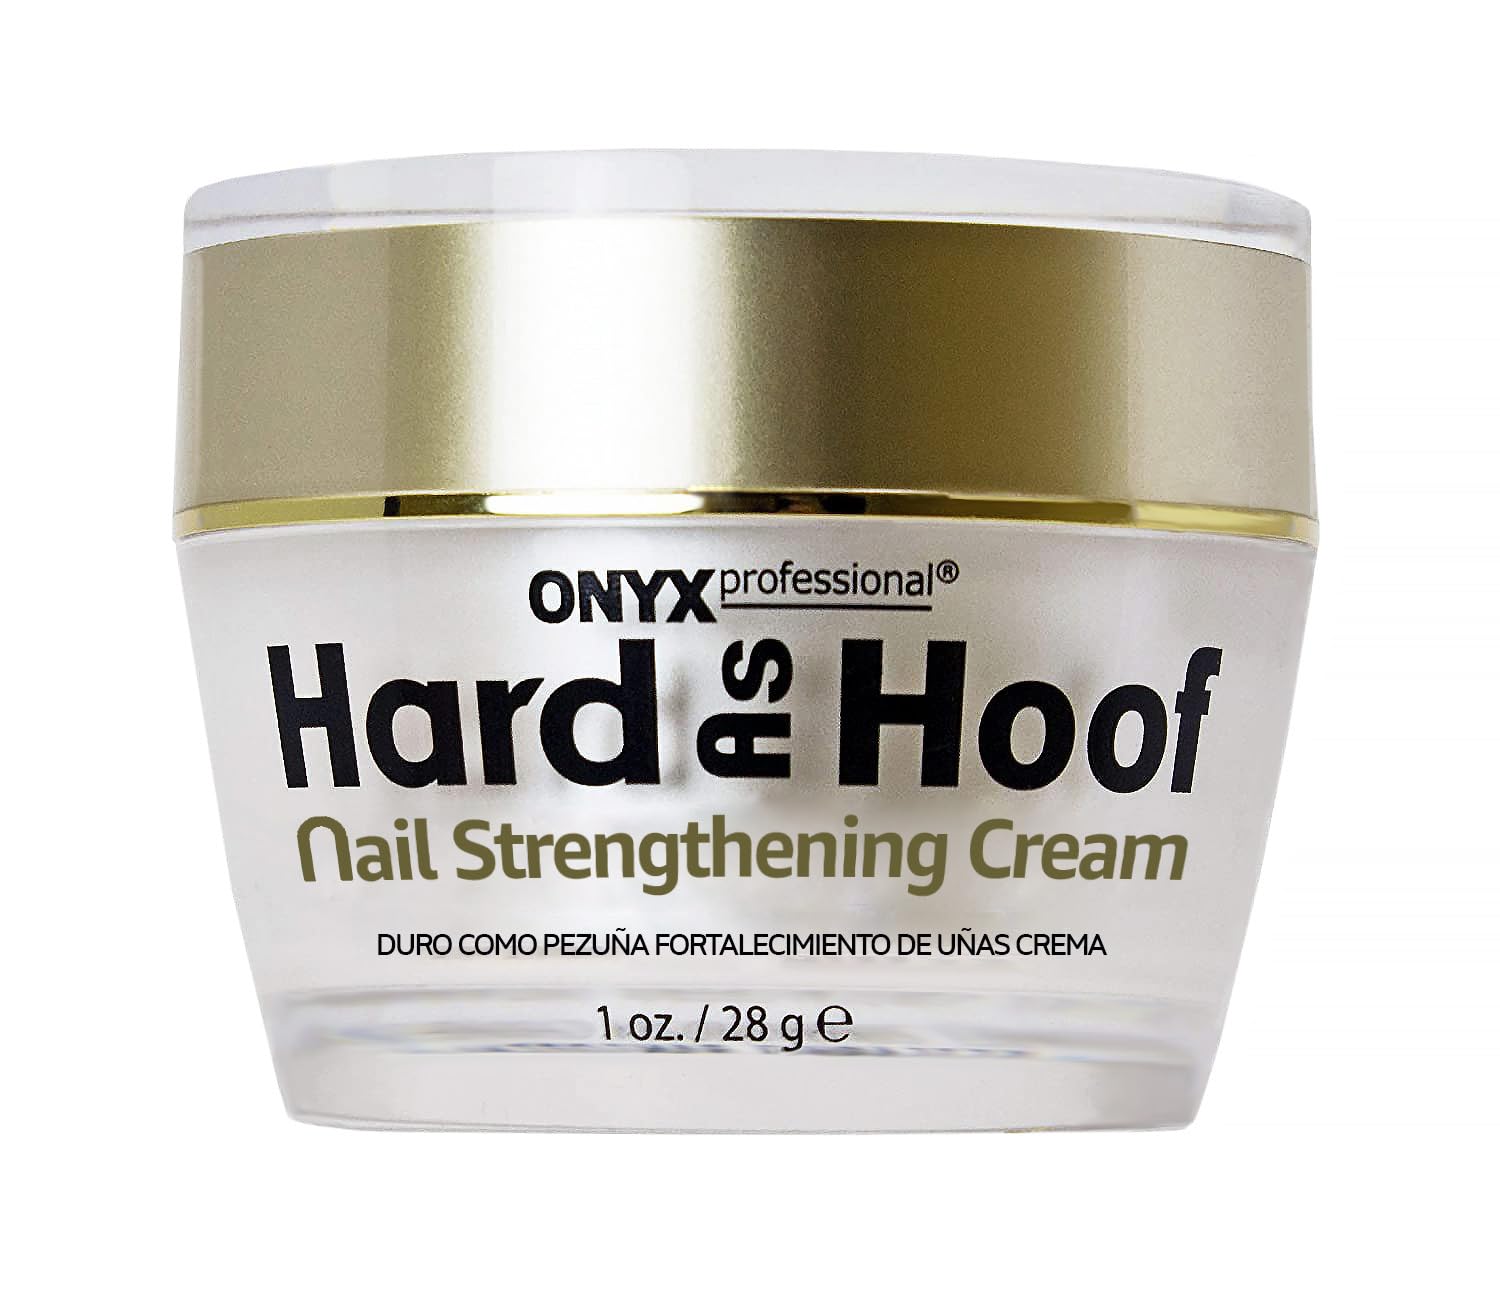 Hard As Hoof Nail Strengthening Cream with Coconut Scent